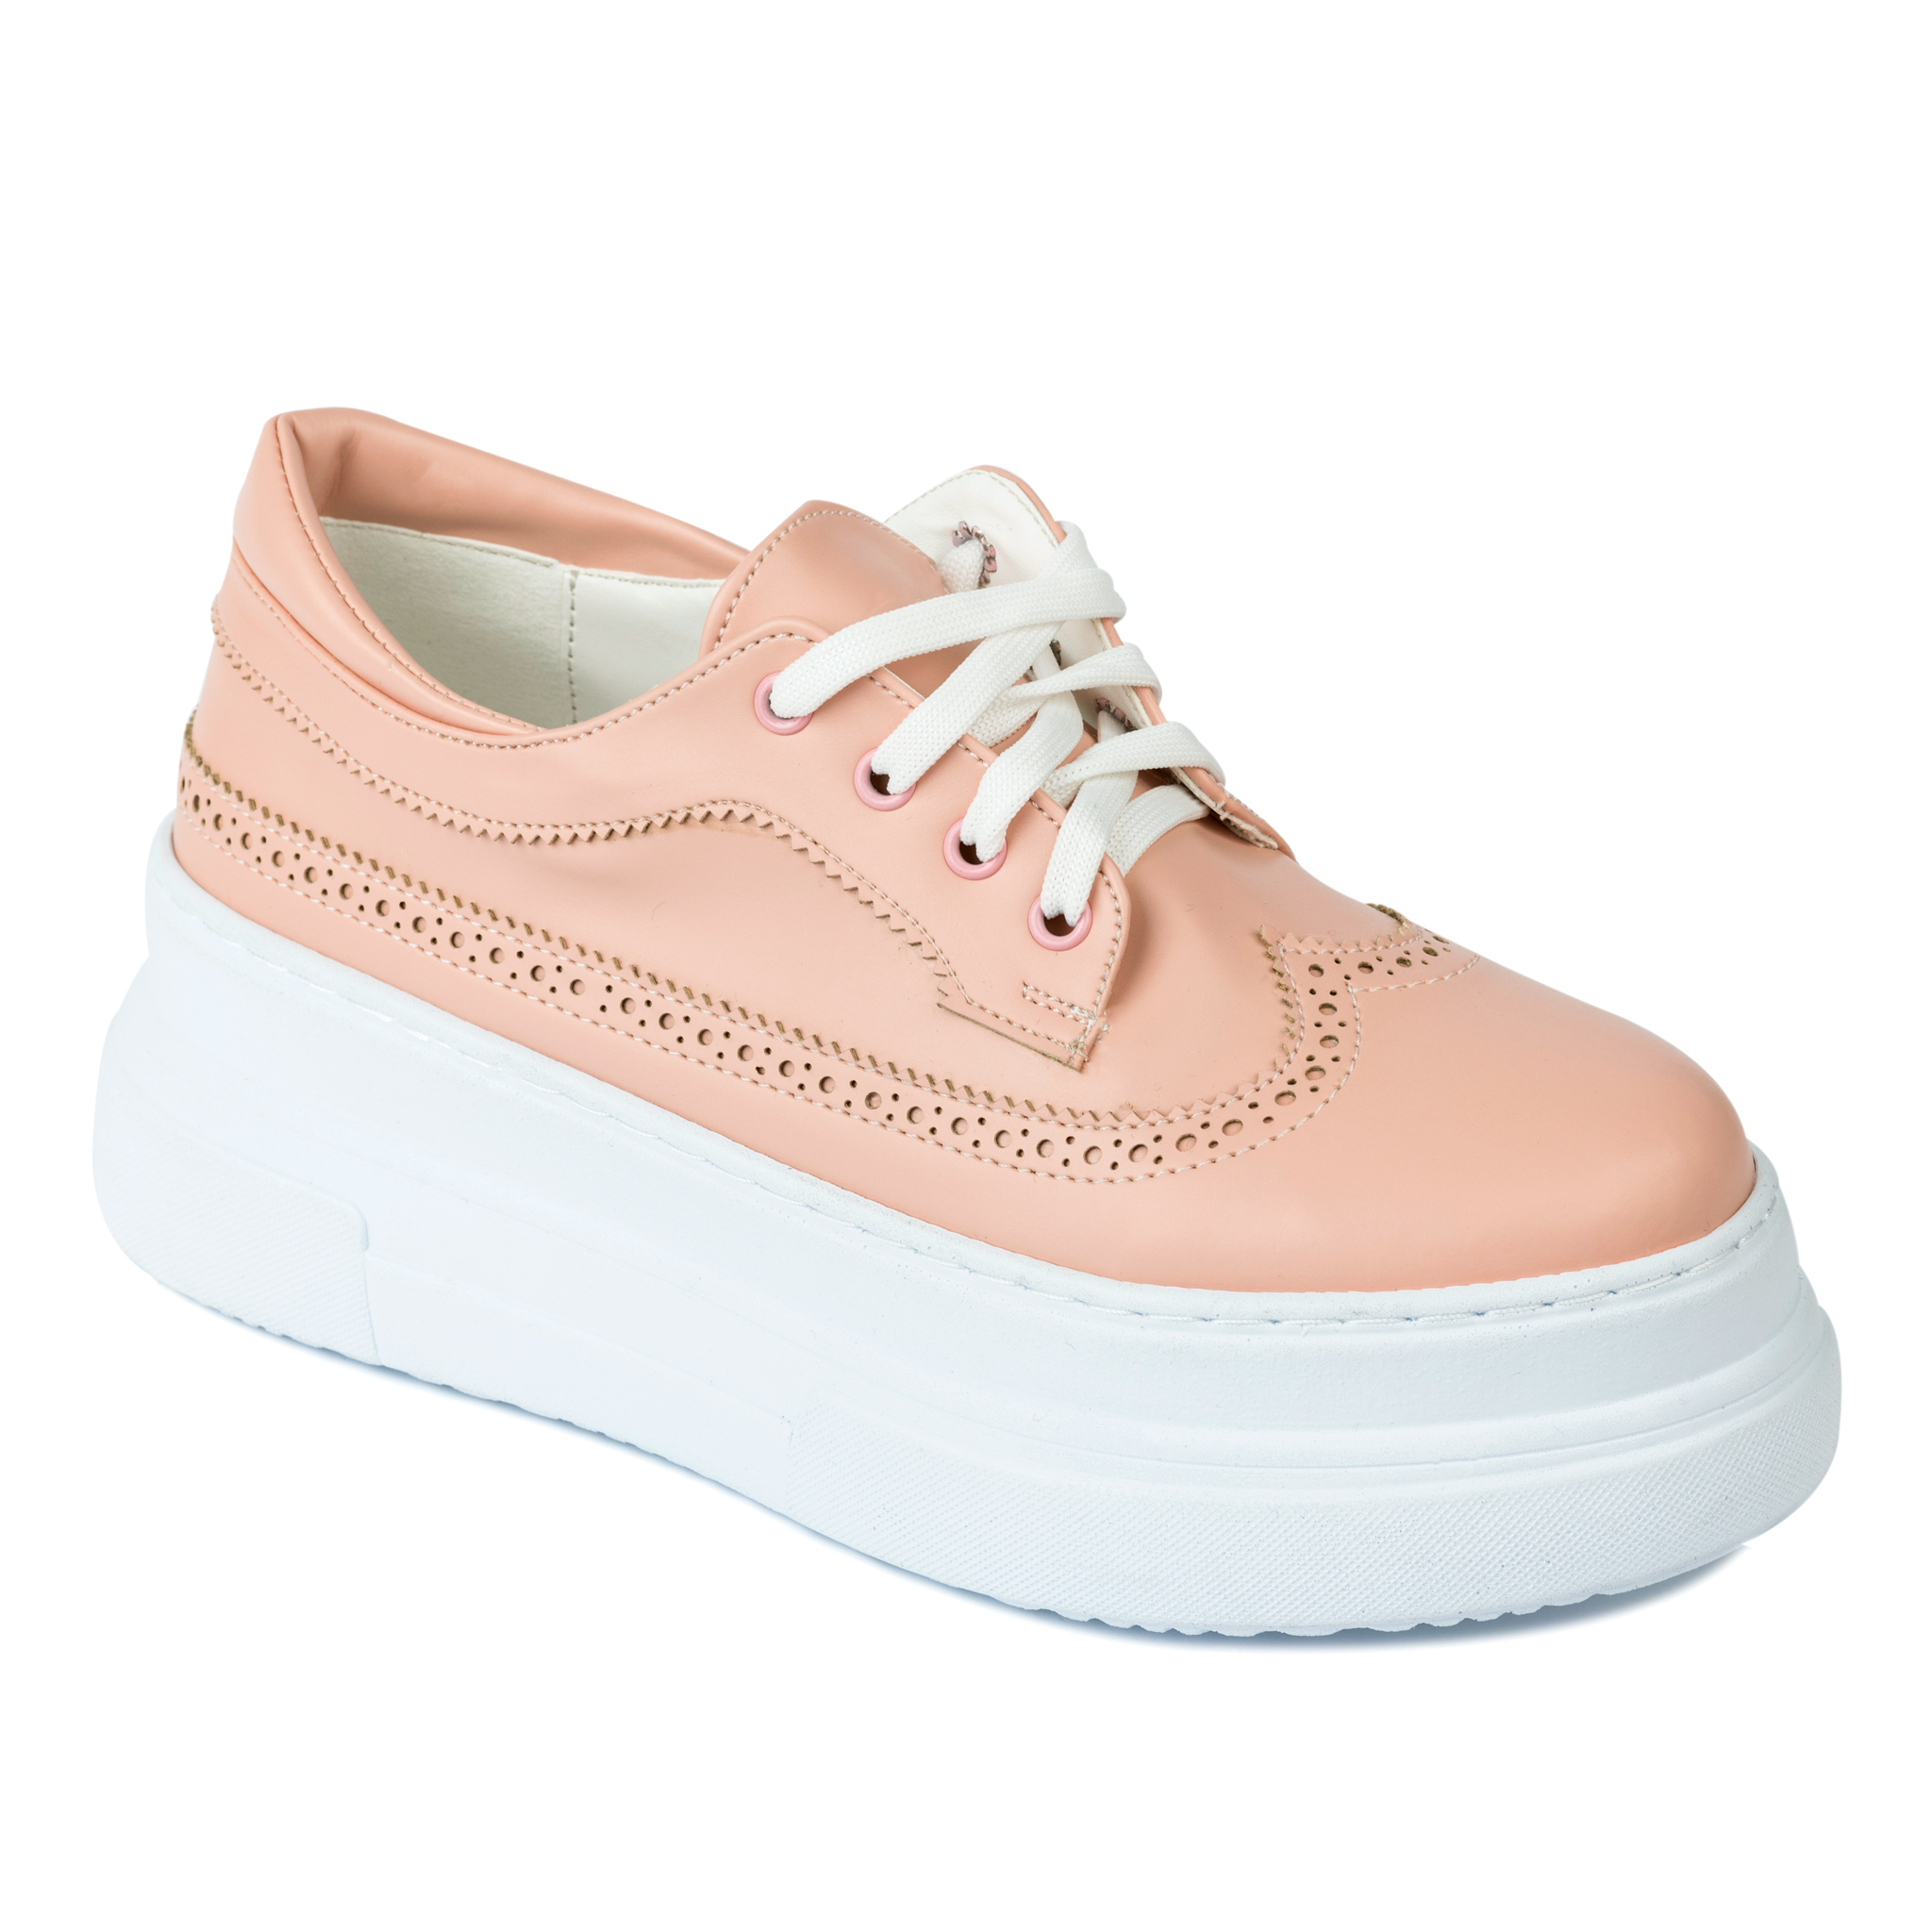 HIGH SOLE SHALLOW SHOES - ROSE